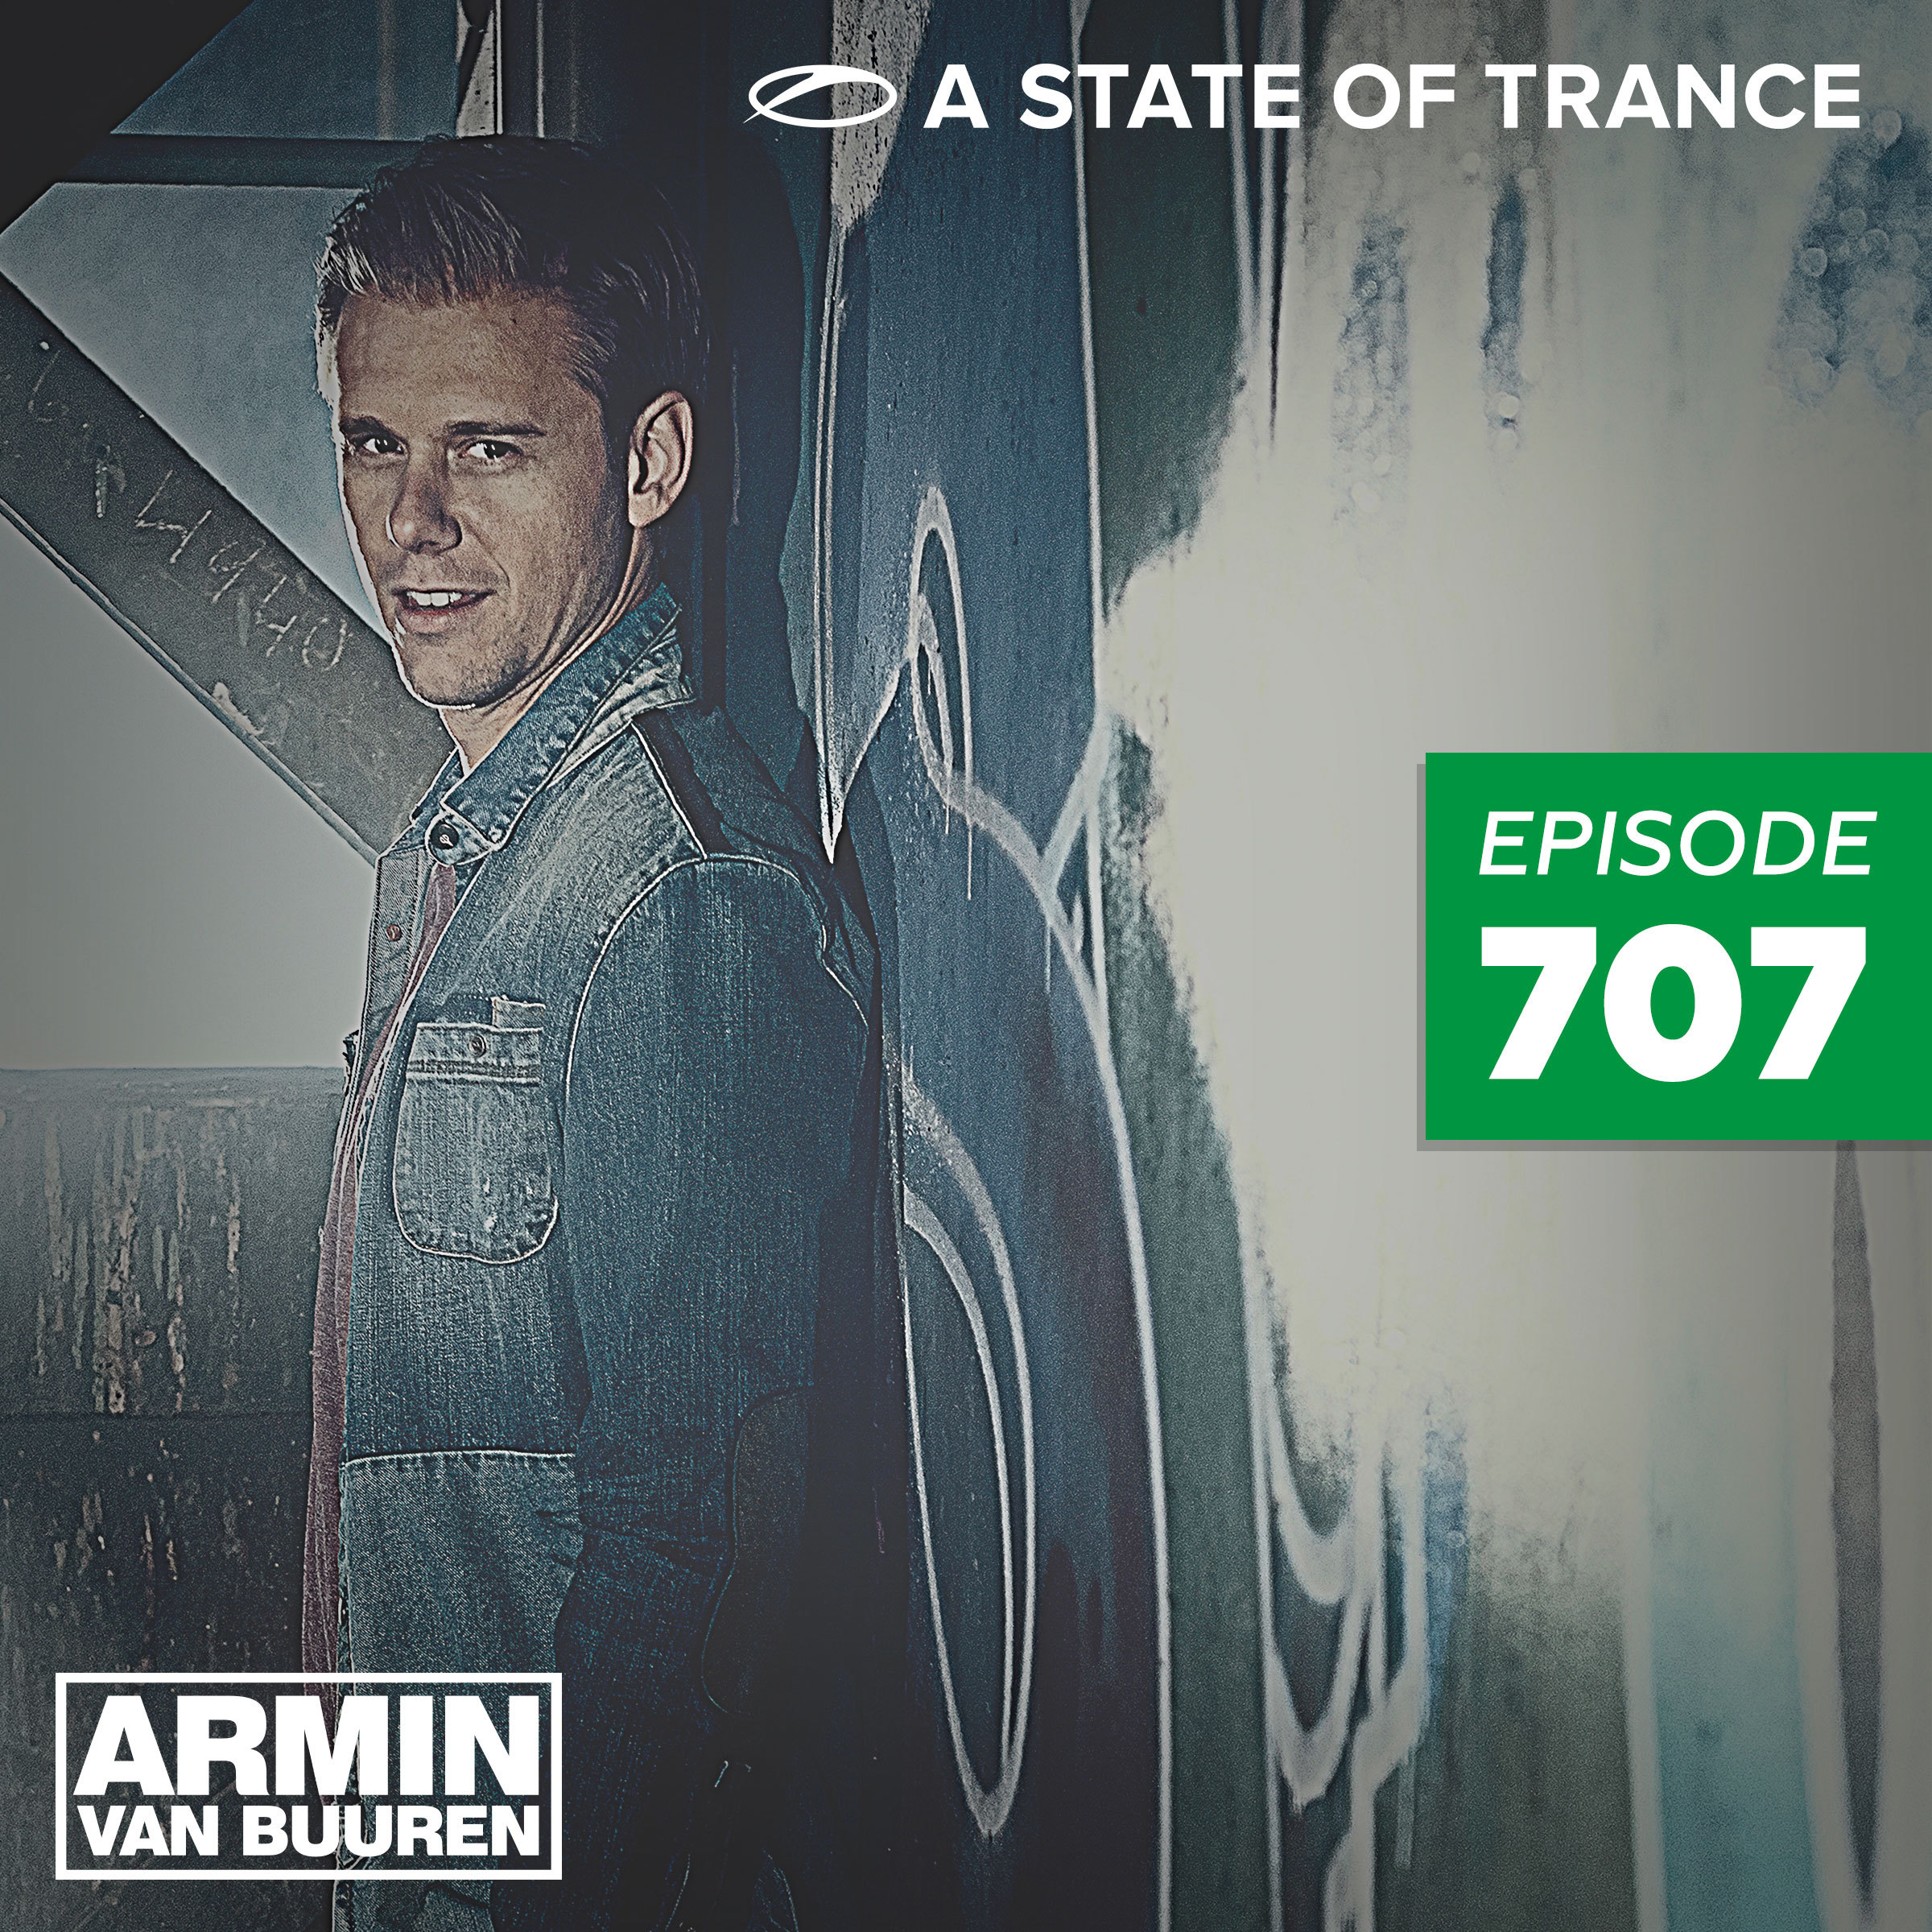 A State Of Trance Episode 707